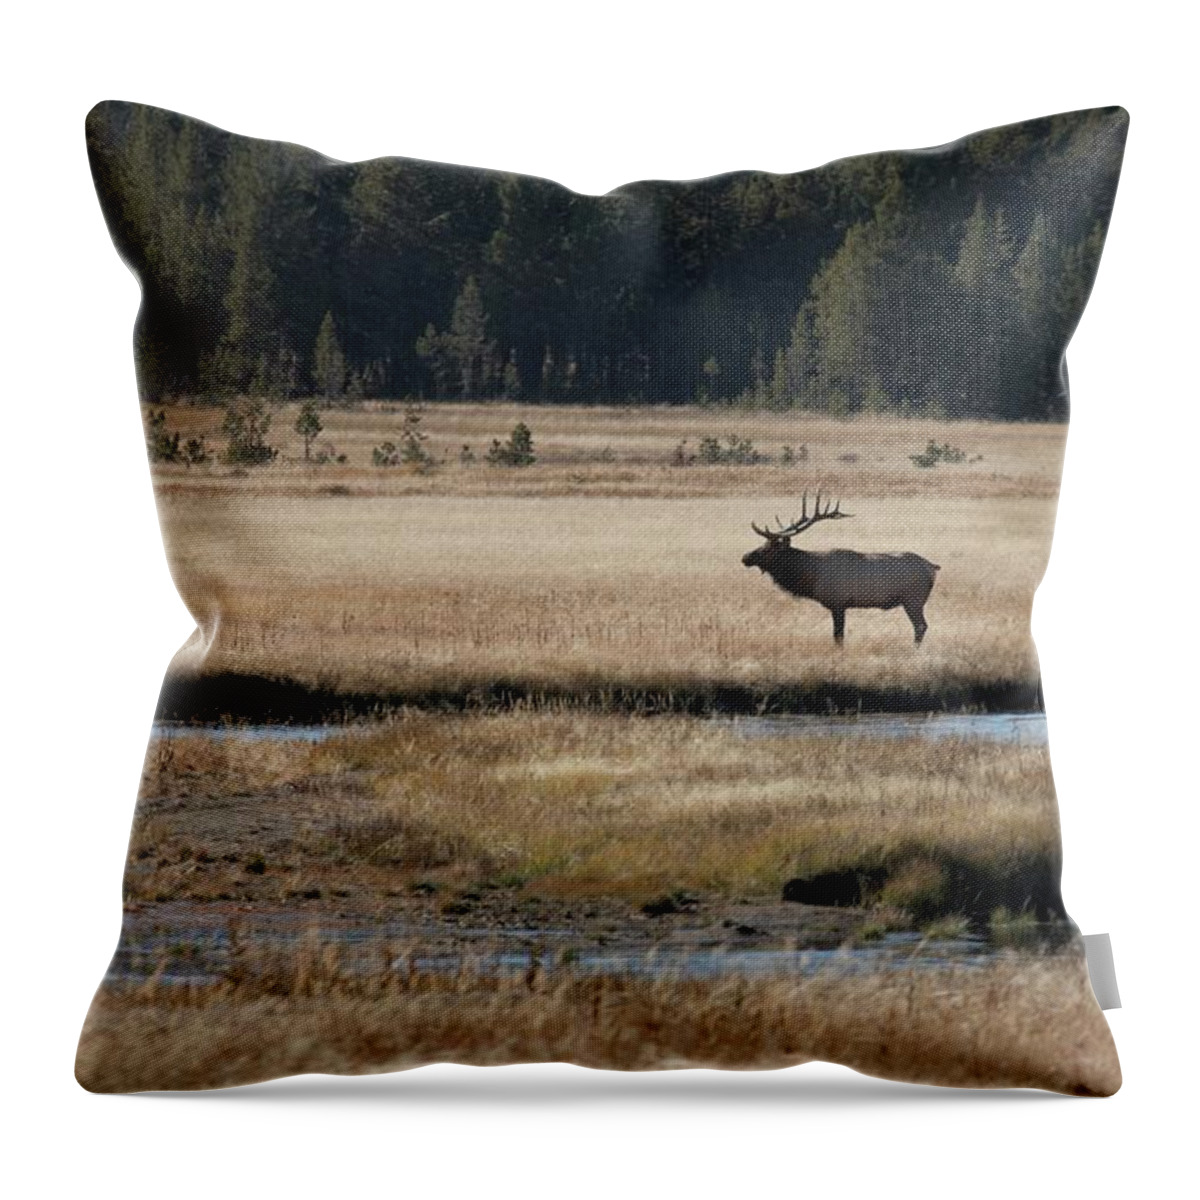 Male Animal Throw Pillow featuring the photograph Bull Elk In A Landscape by Rpbirdman